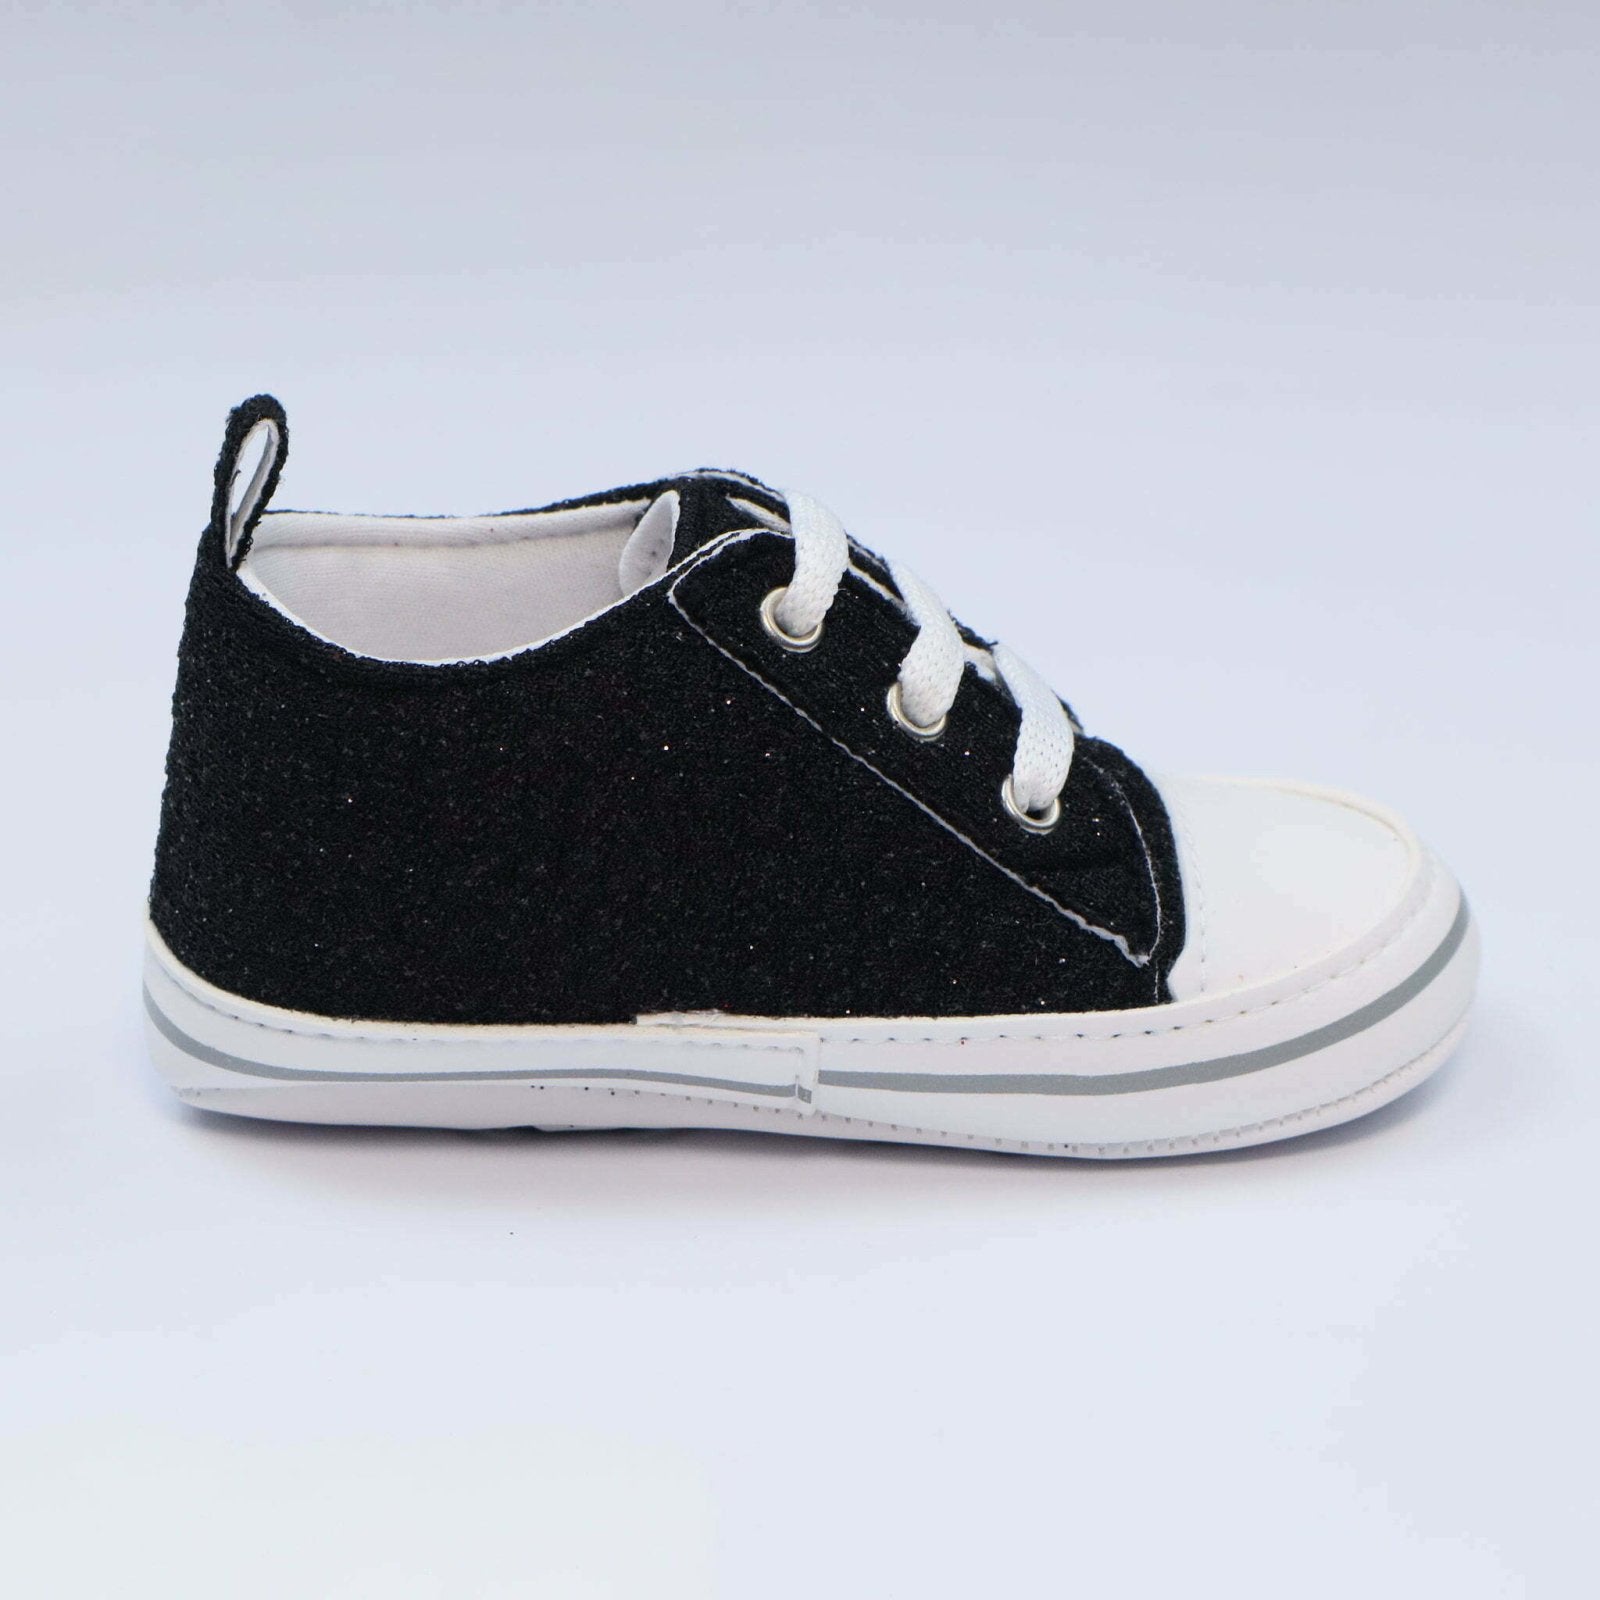 Baby Shoes Black & White by Baby Pattini